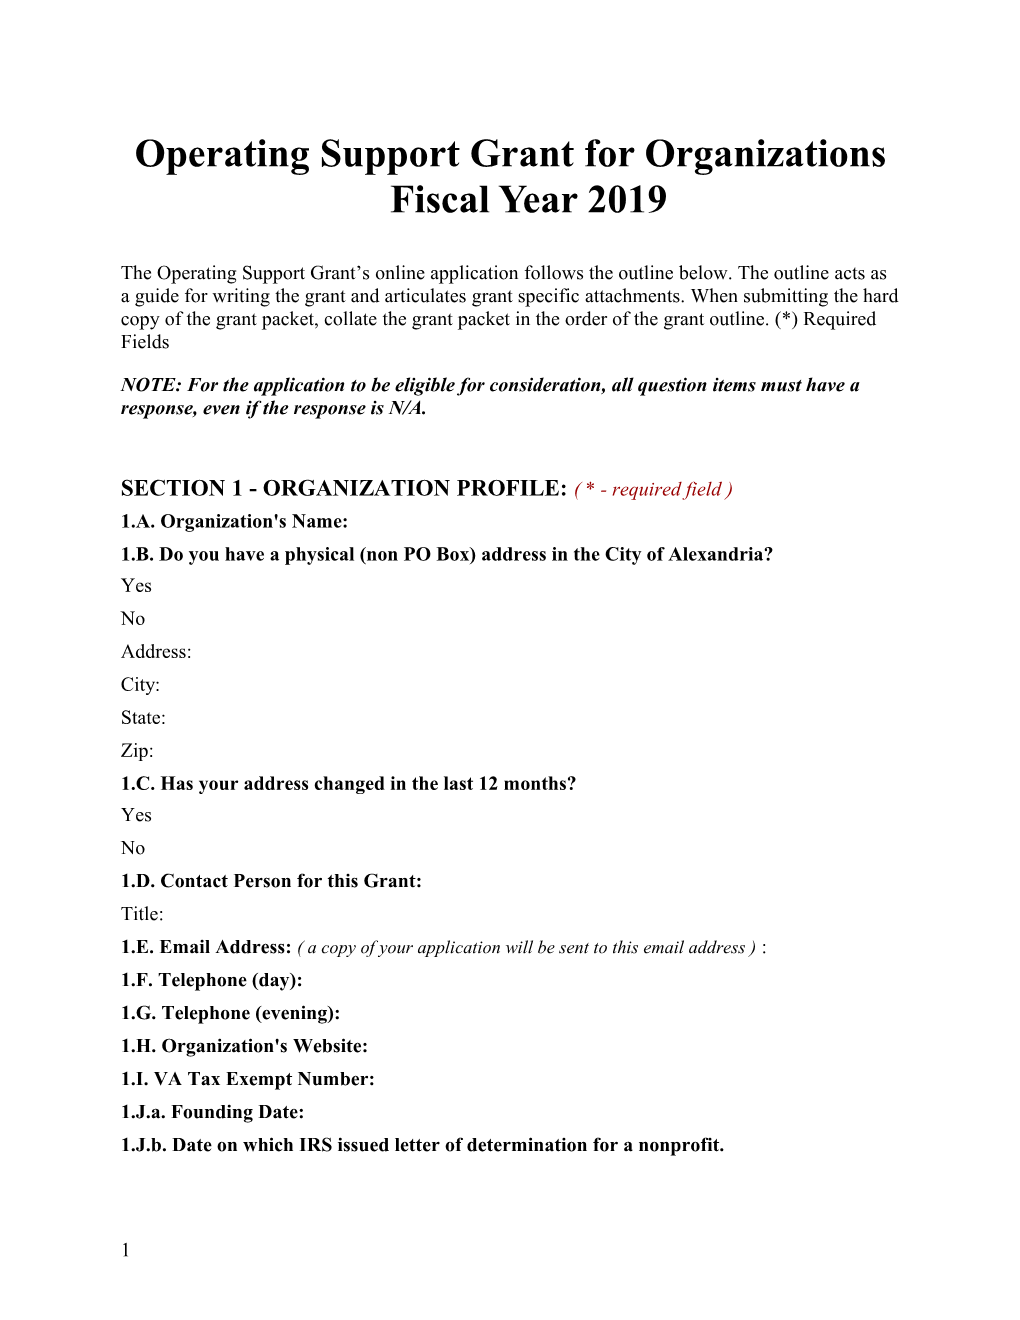 Operating Support Grant for Organizationsfiscal Year 2019